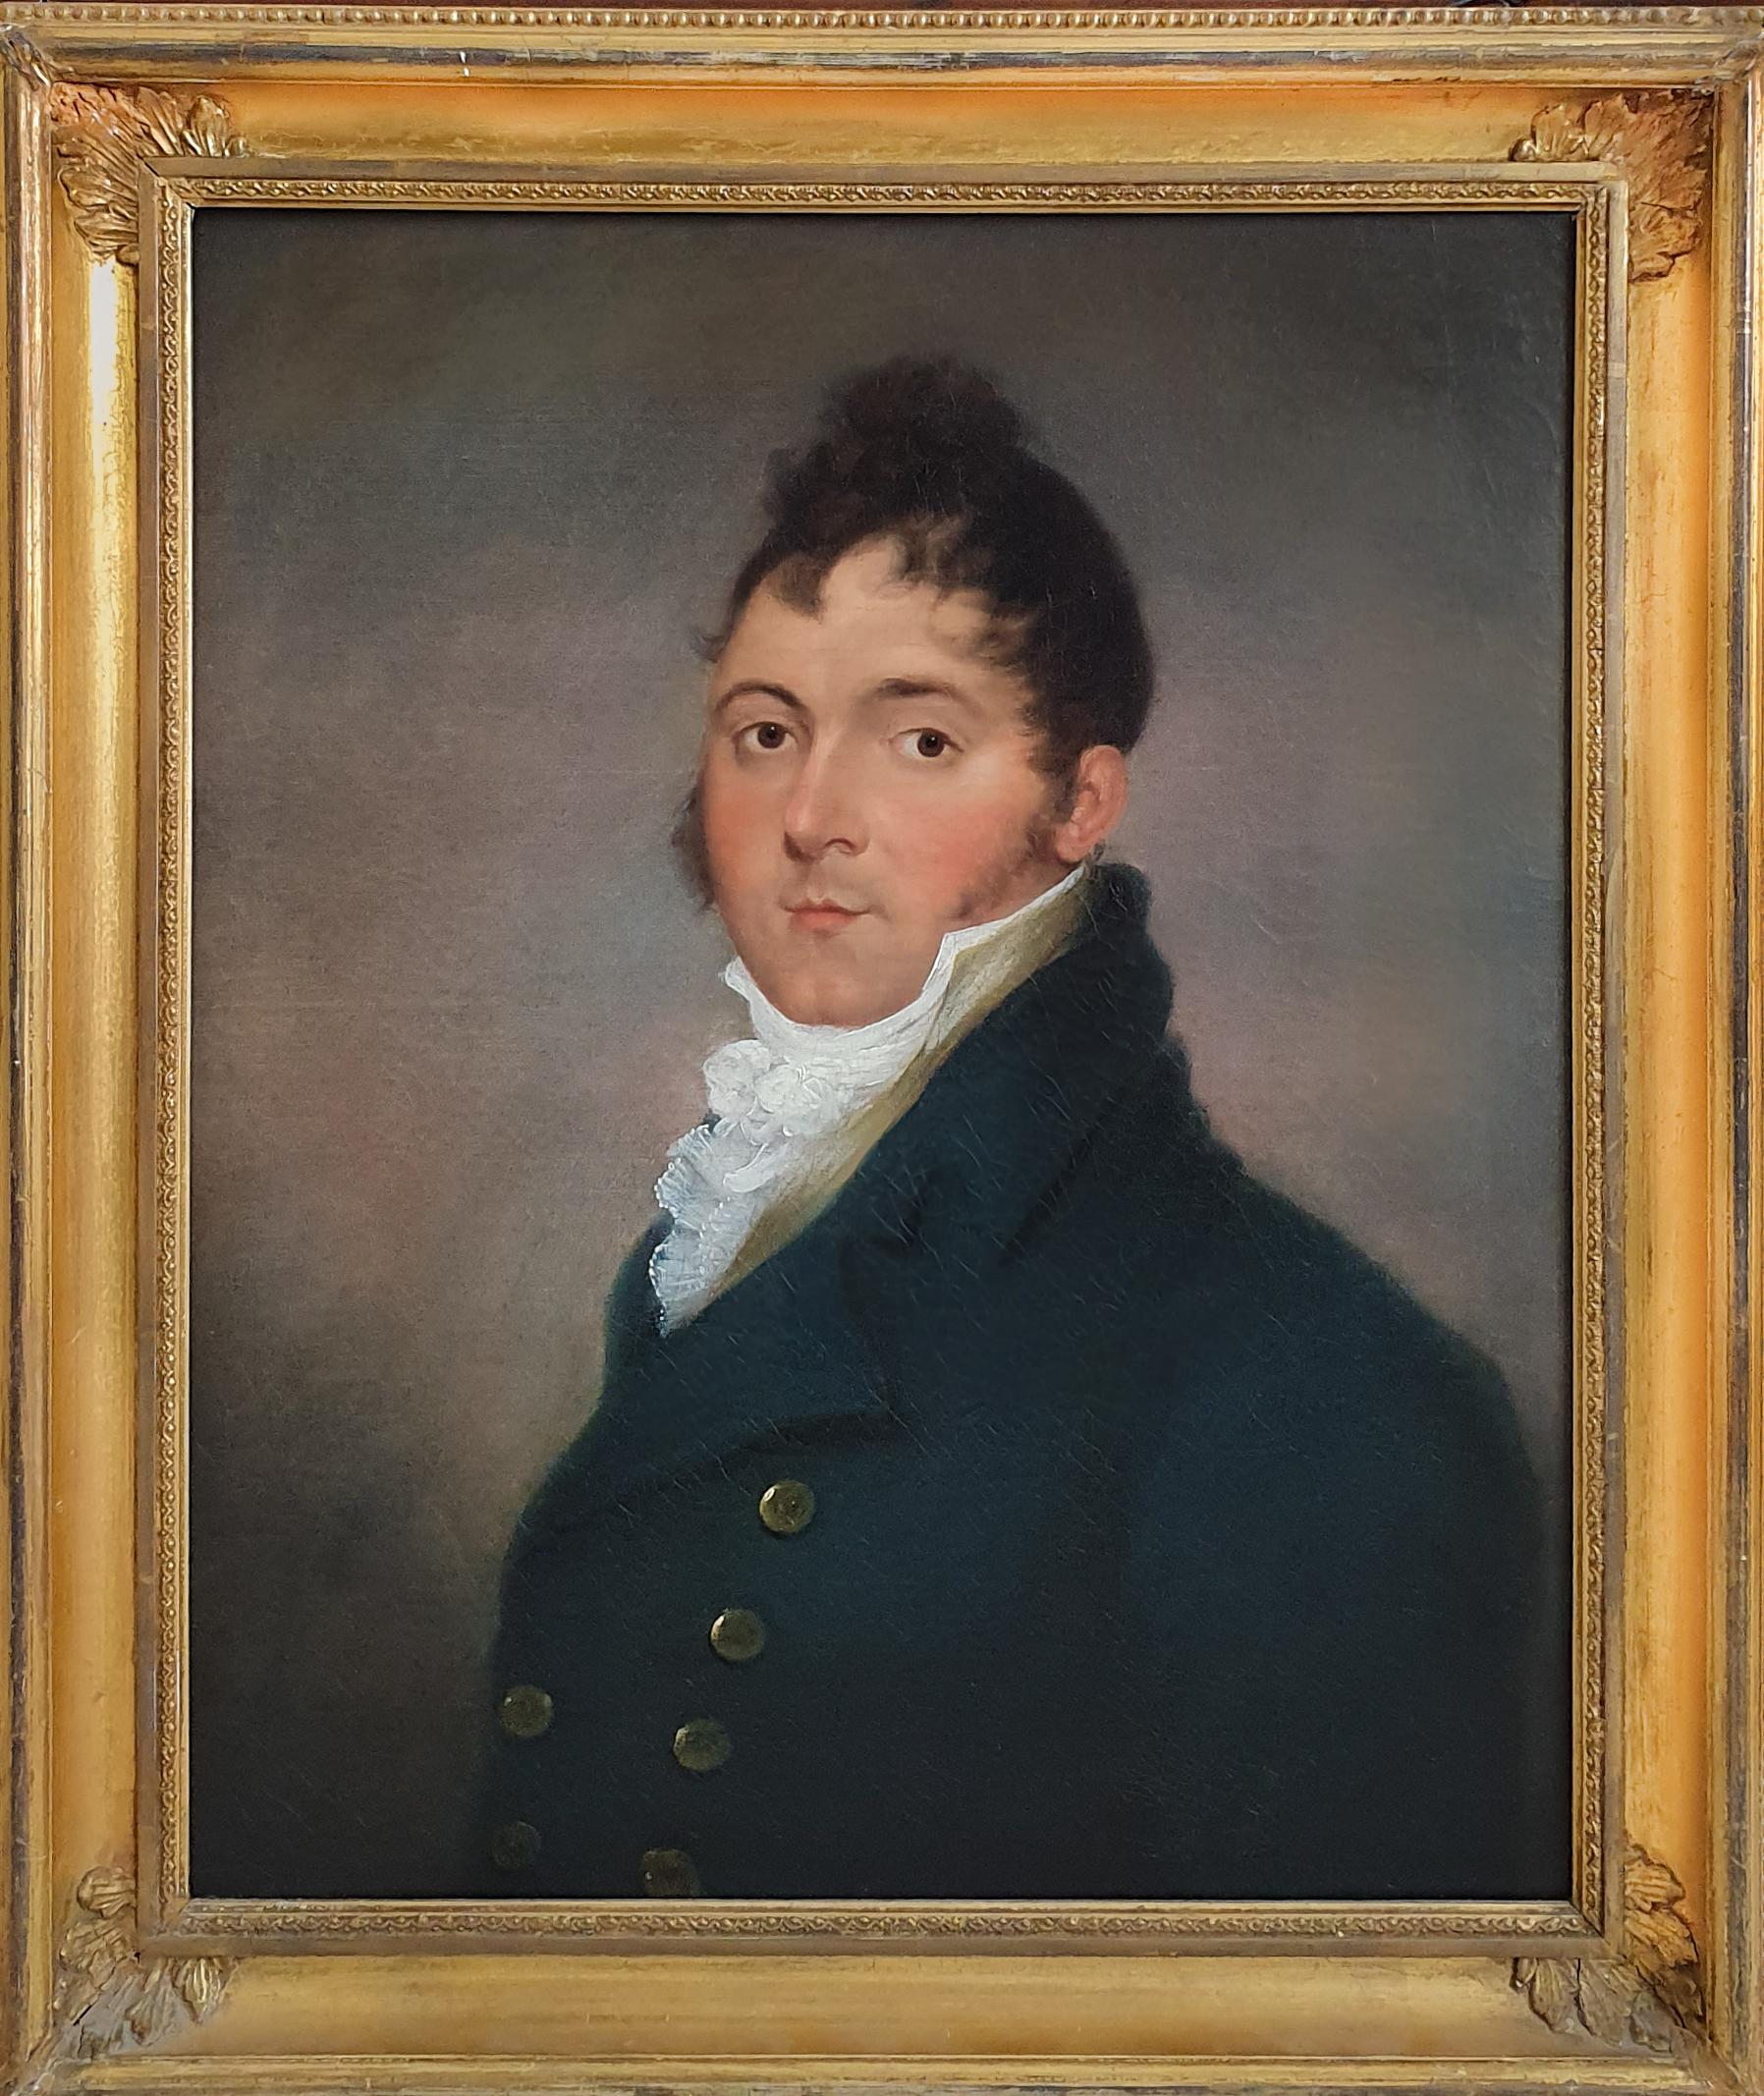 Titan Fine Art are pleased to present this attractive portrait, that depicts a young gentleman in fashionable clothing.  The double-breasted coat with the high collar, the type of cut-out on the label, the cravat, the slim tan waistcoat collar, and